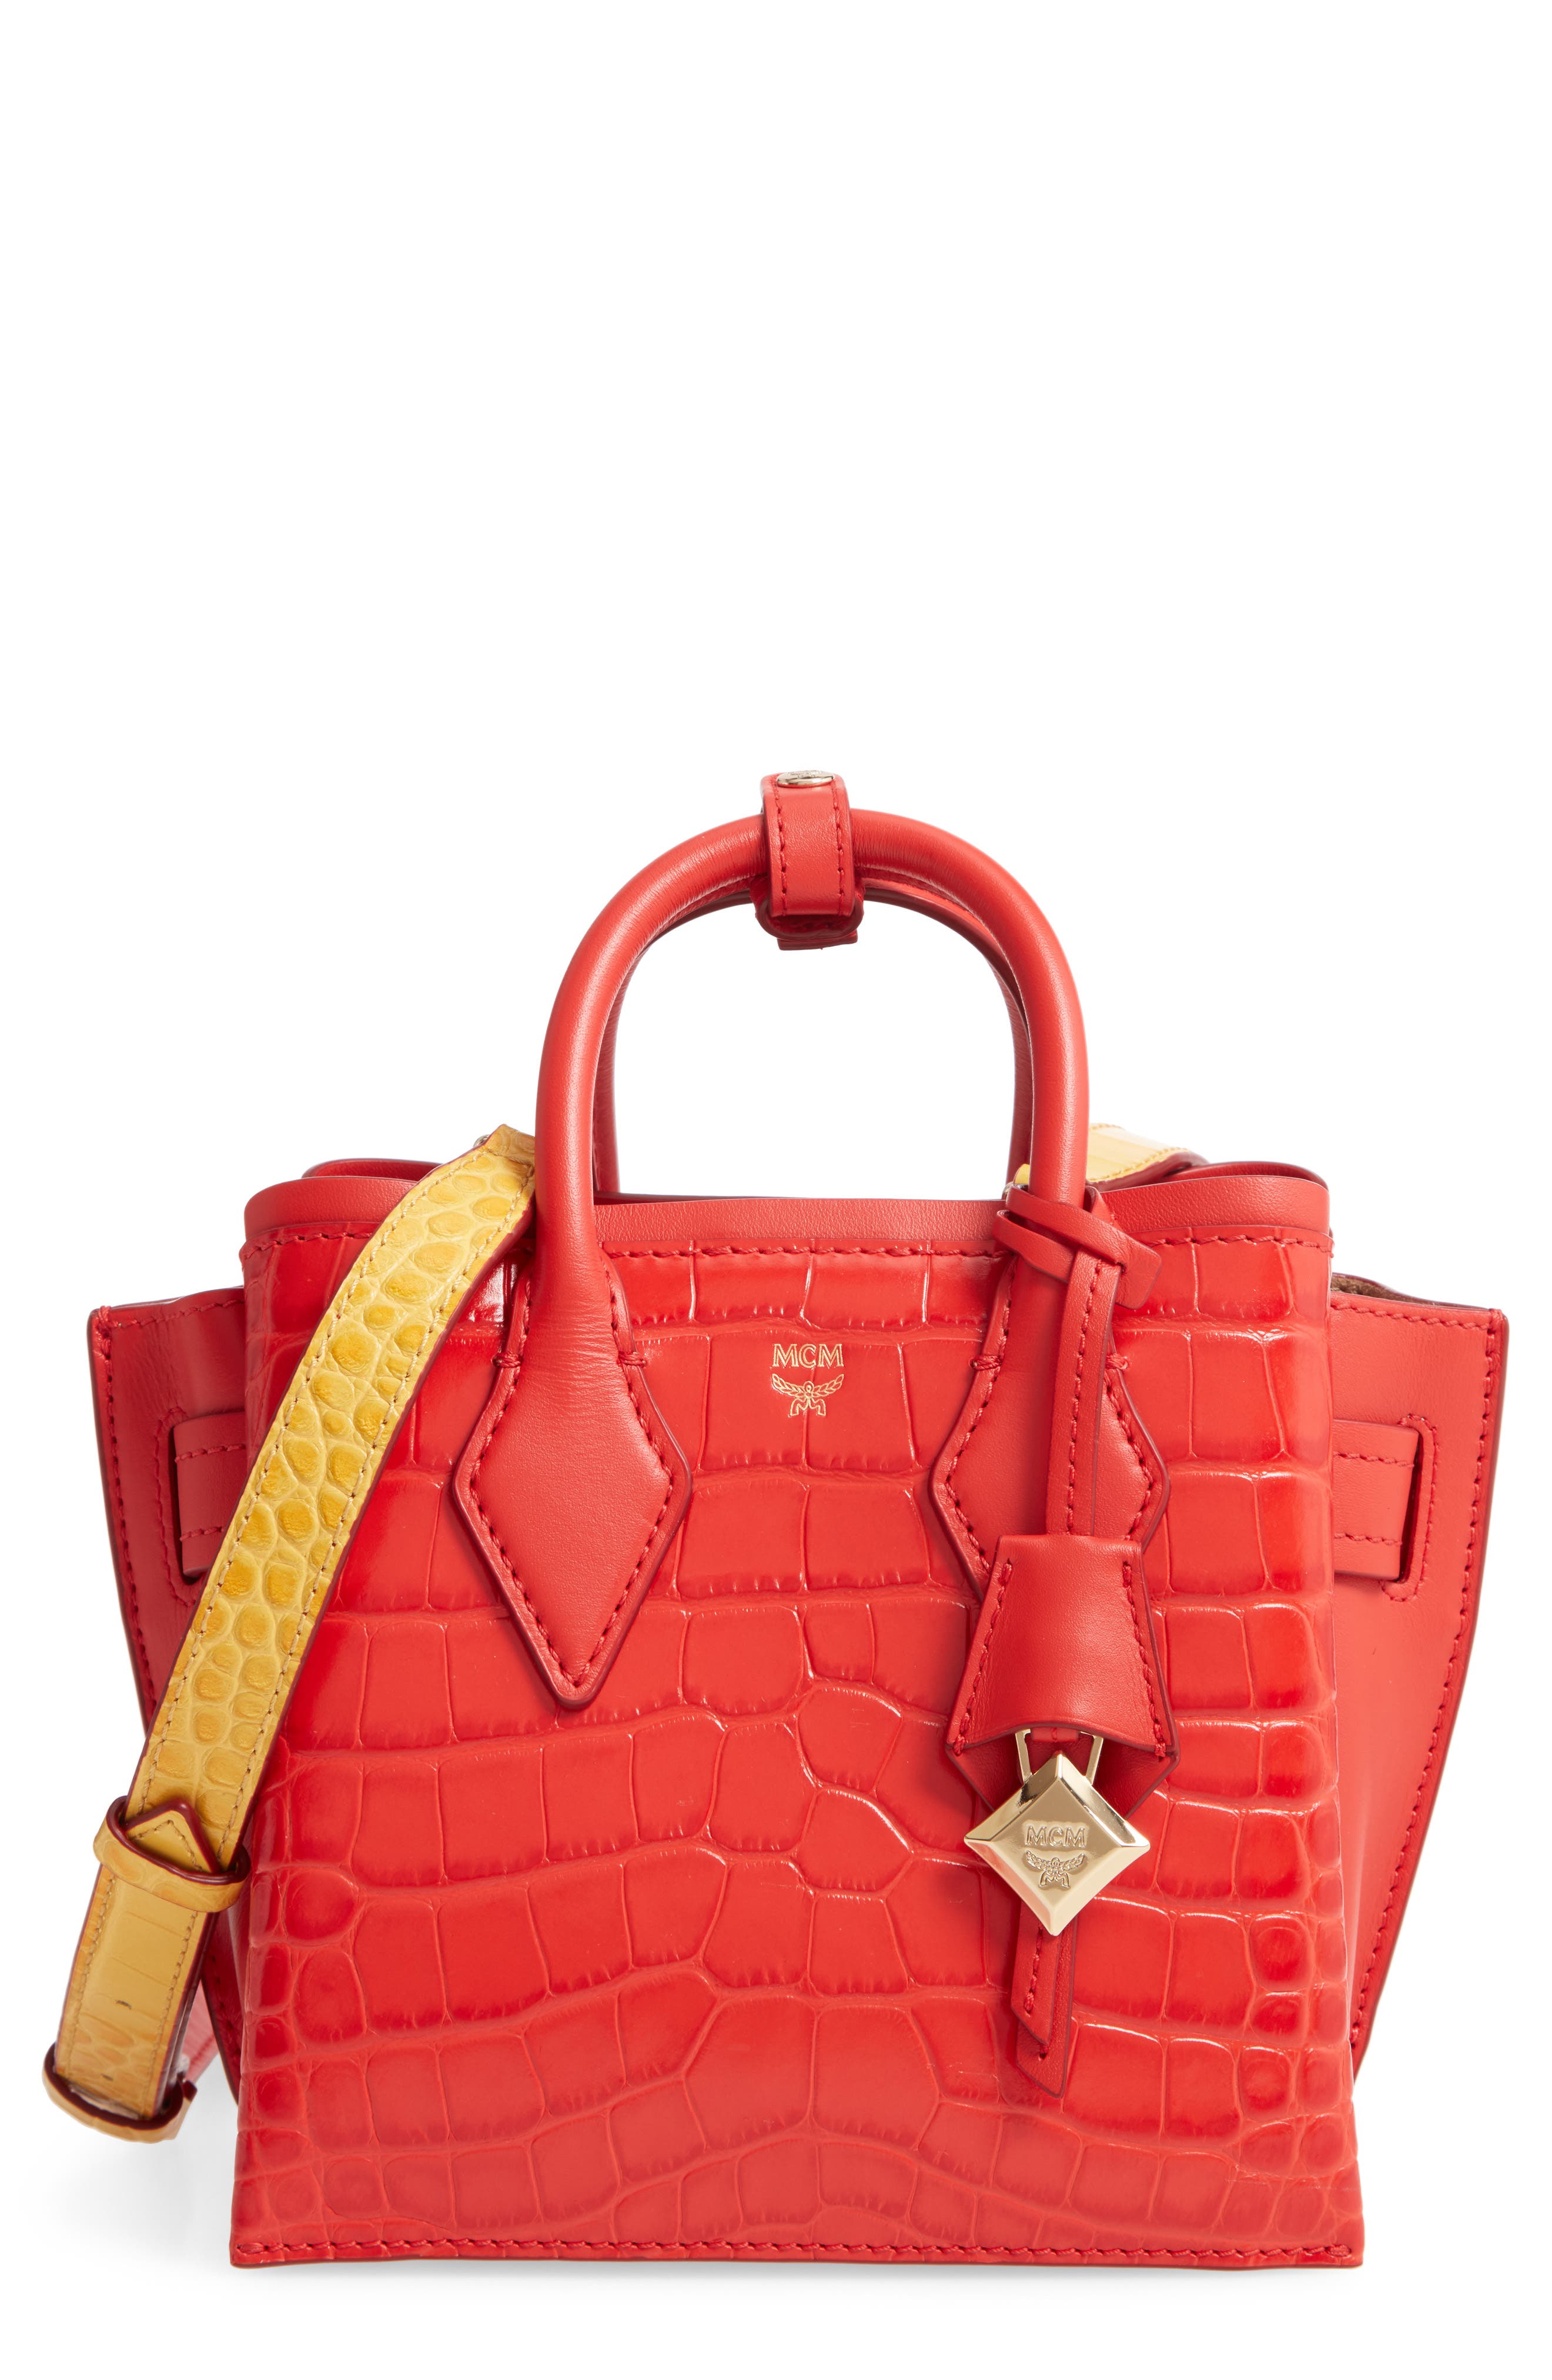 MCM Neo Milla Embossed Leather Tote in Ruby Red at Nordstrom